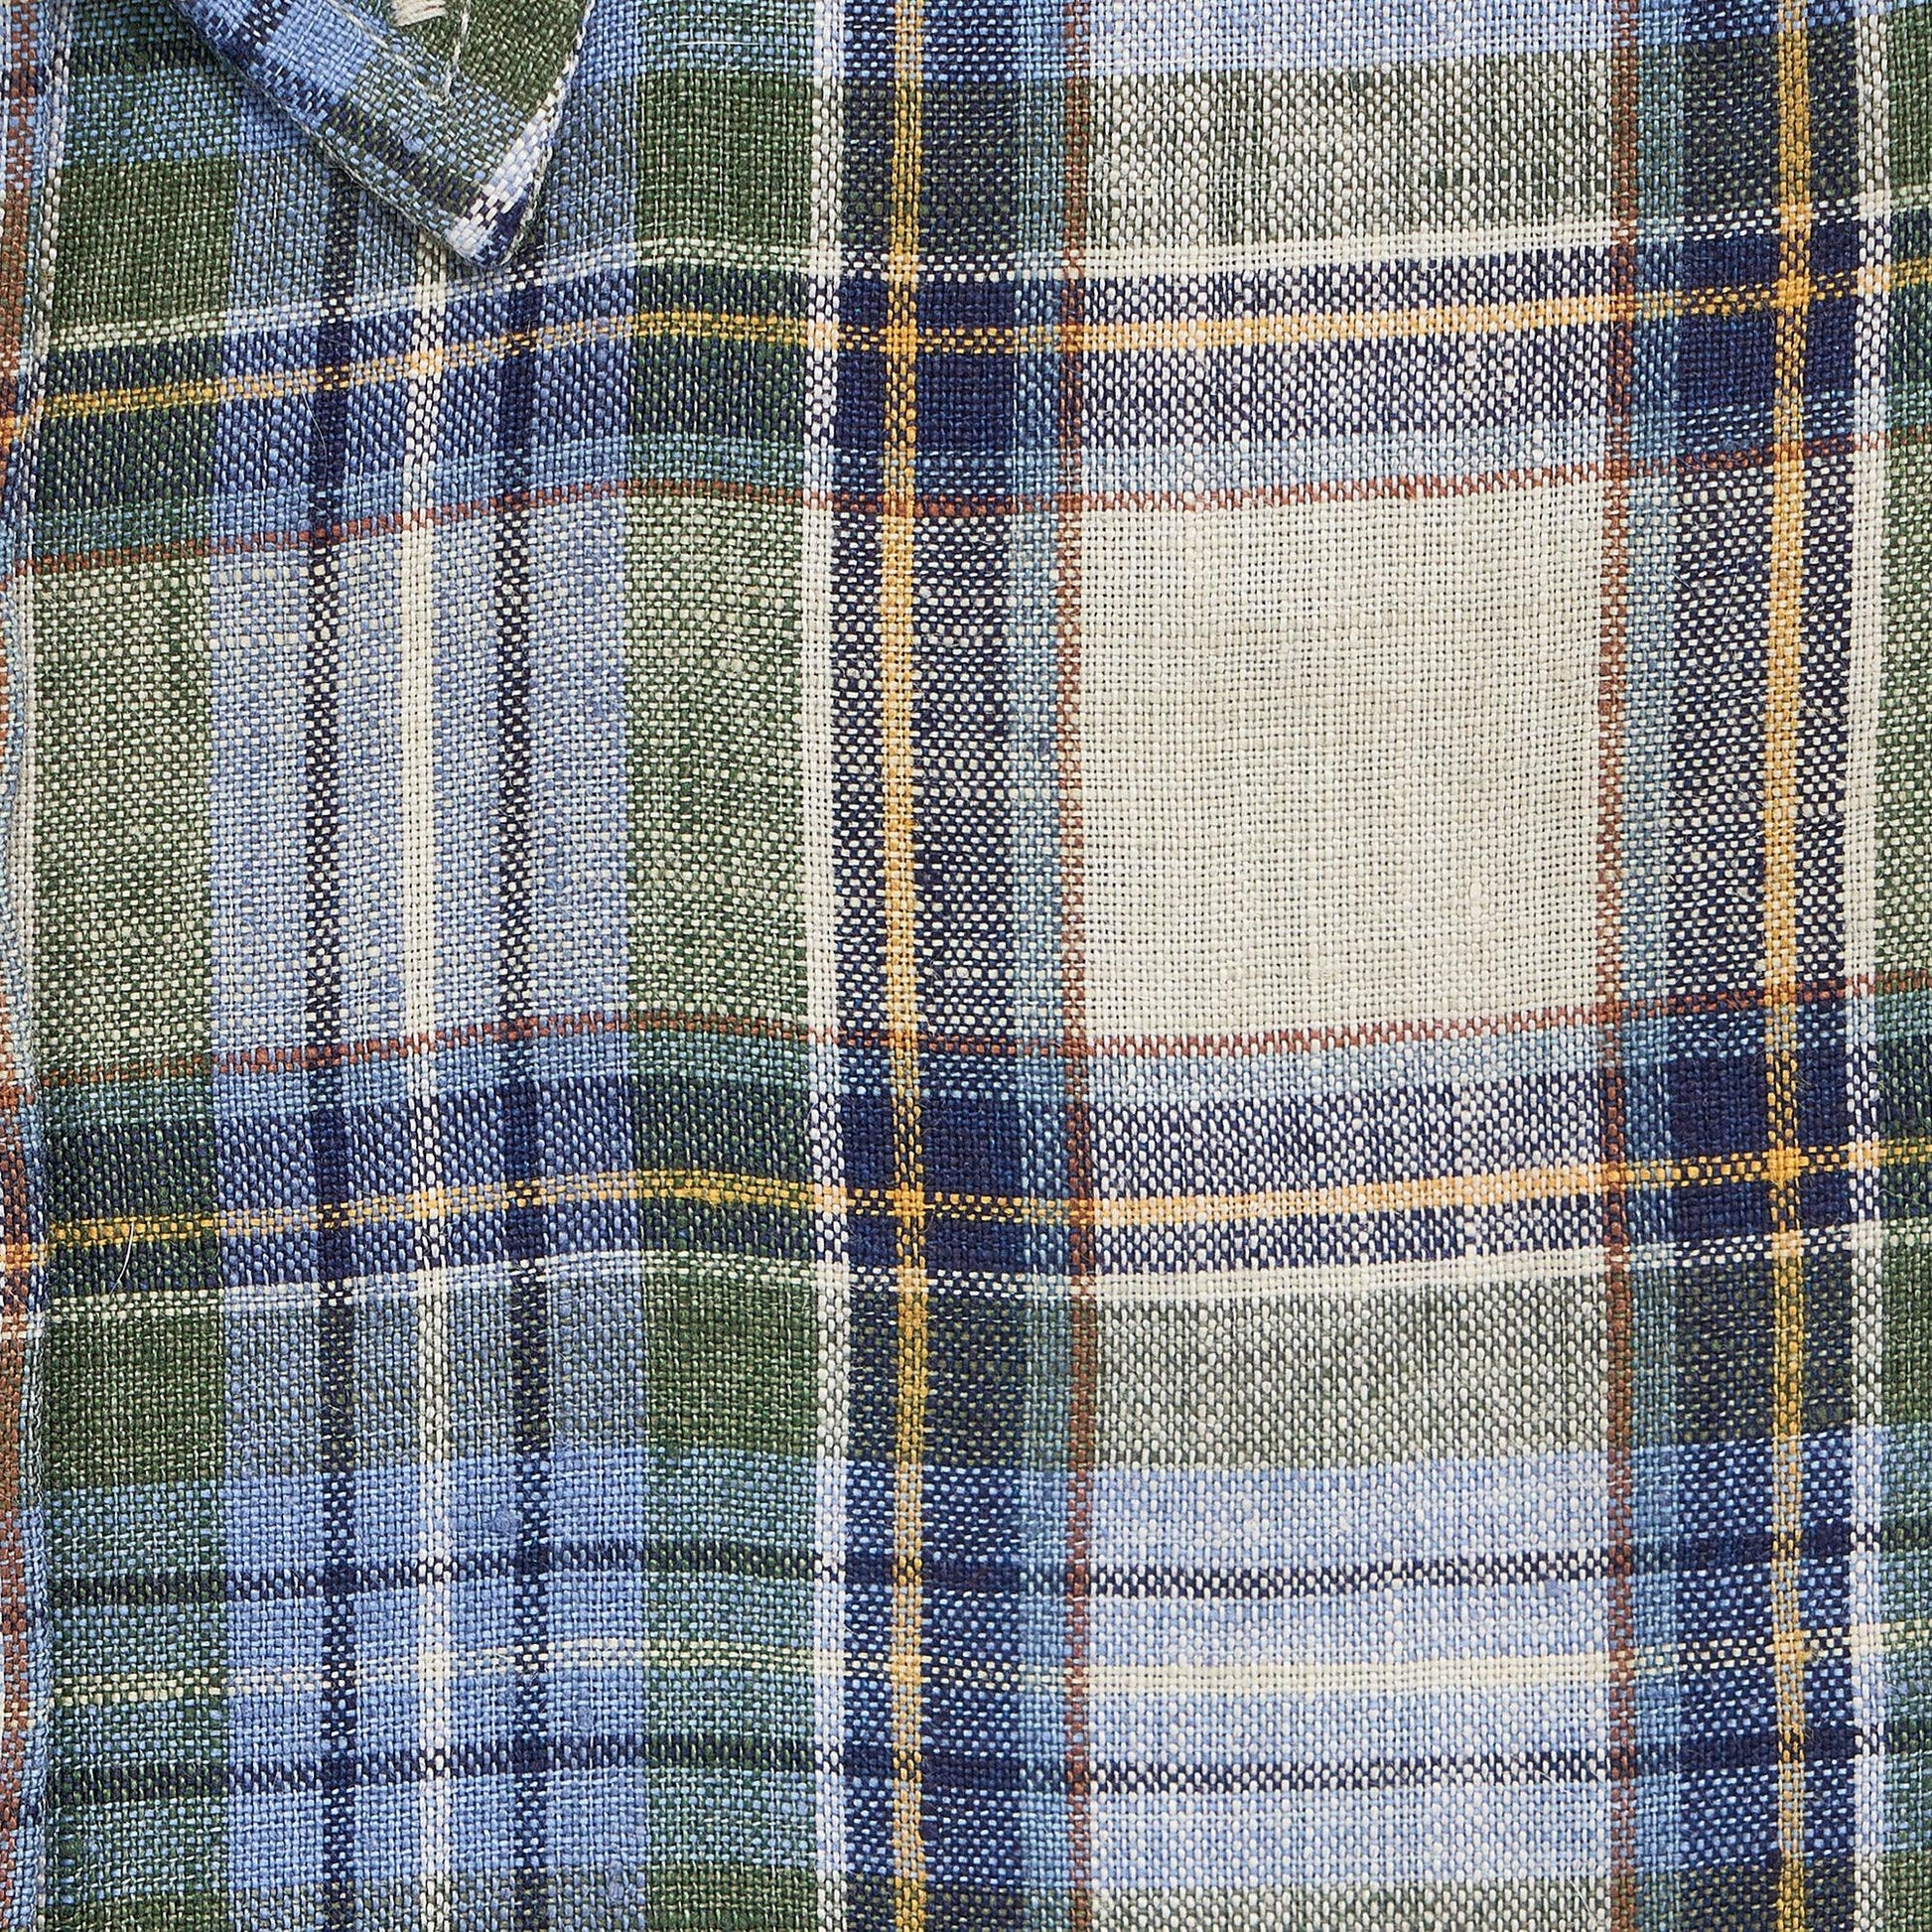 St. Marks Reserve Button Down - Onward Reserve